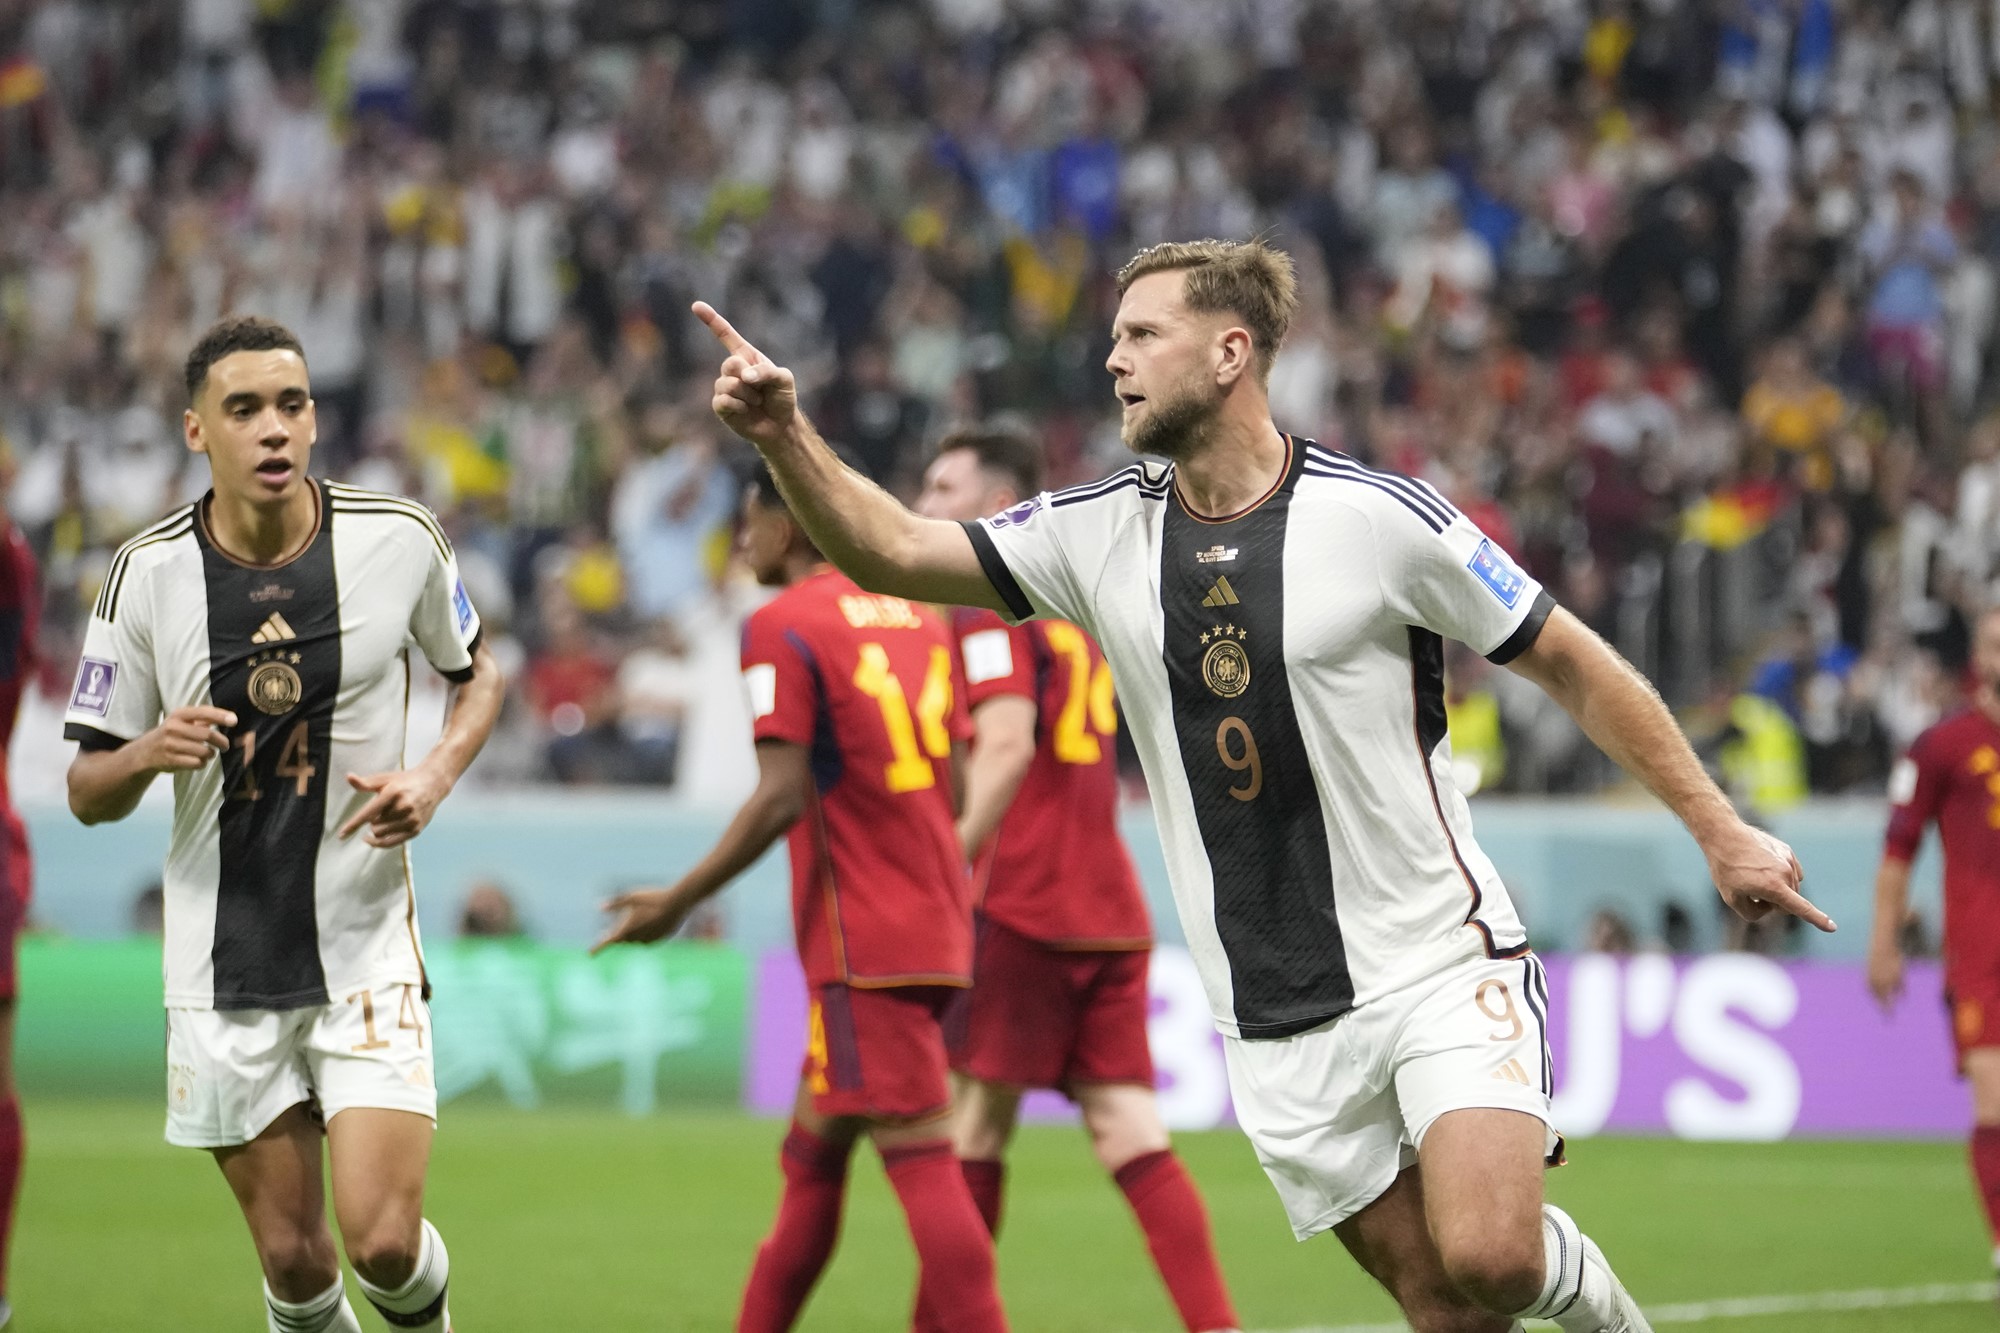 Germany's Niclas Füllkrug celebrates a goal against Spain at the World Cup.